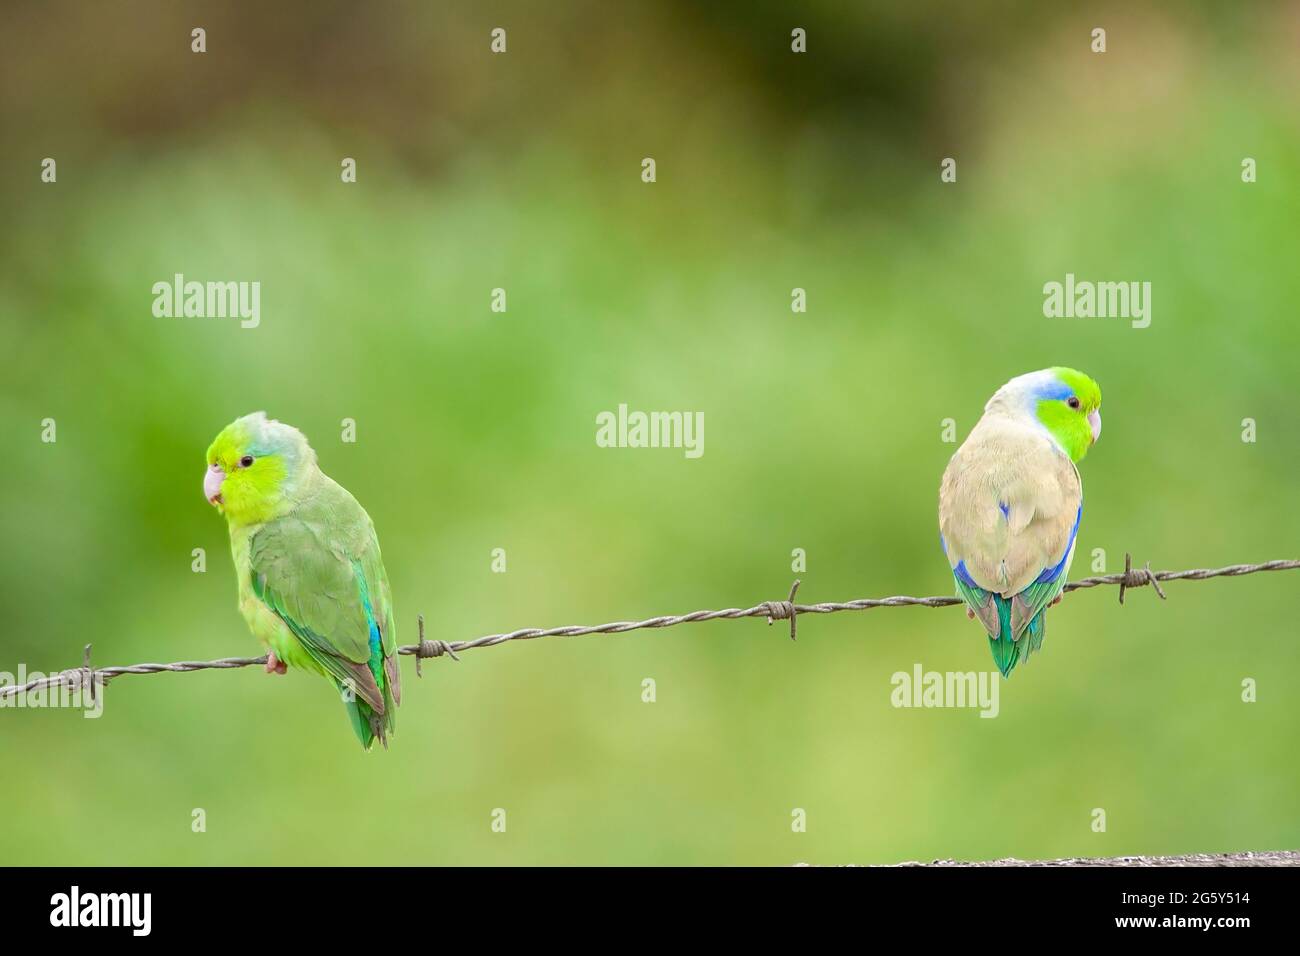 Pacific parrotlet, Forpus colestis, two birds perched on barbed wire fence, Manta, Ecuador Stock Photo